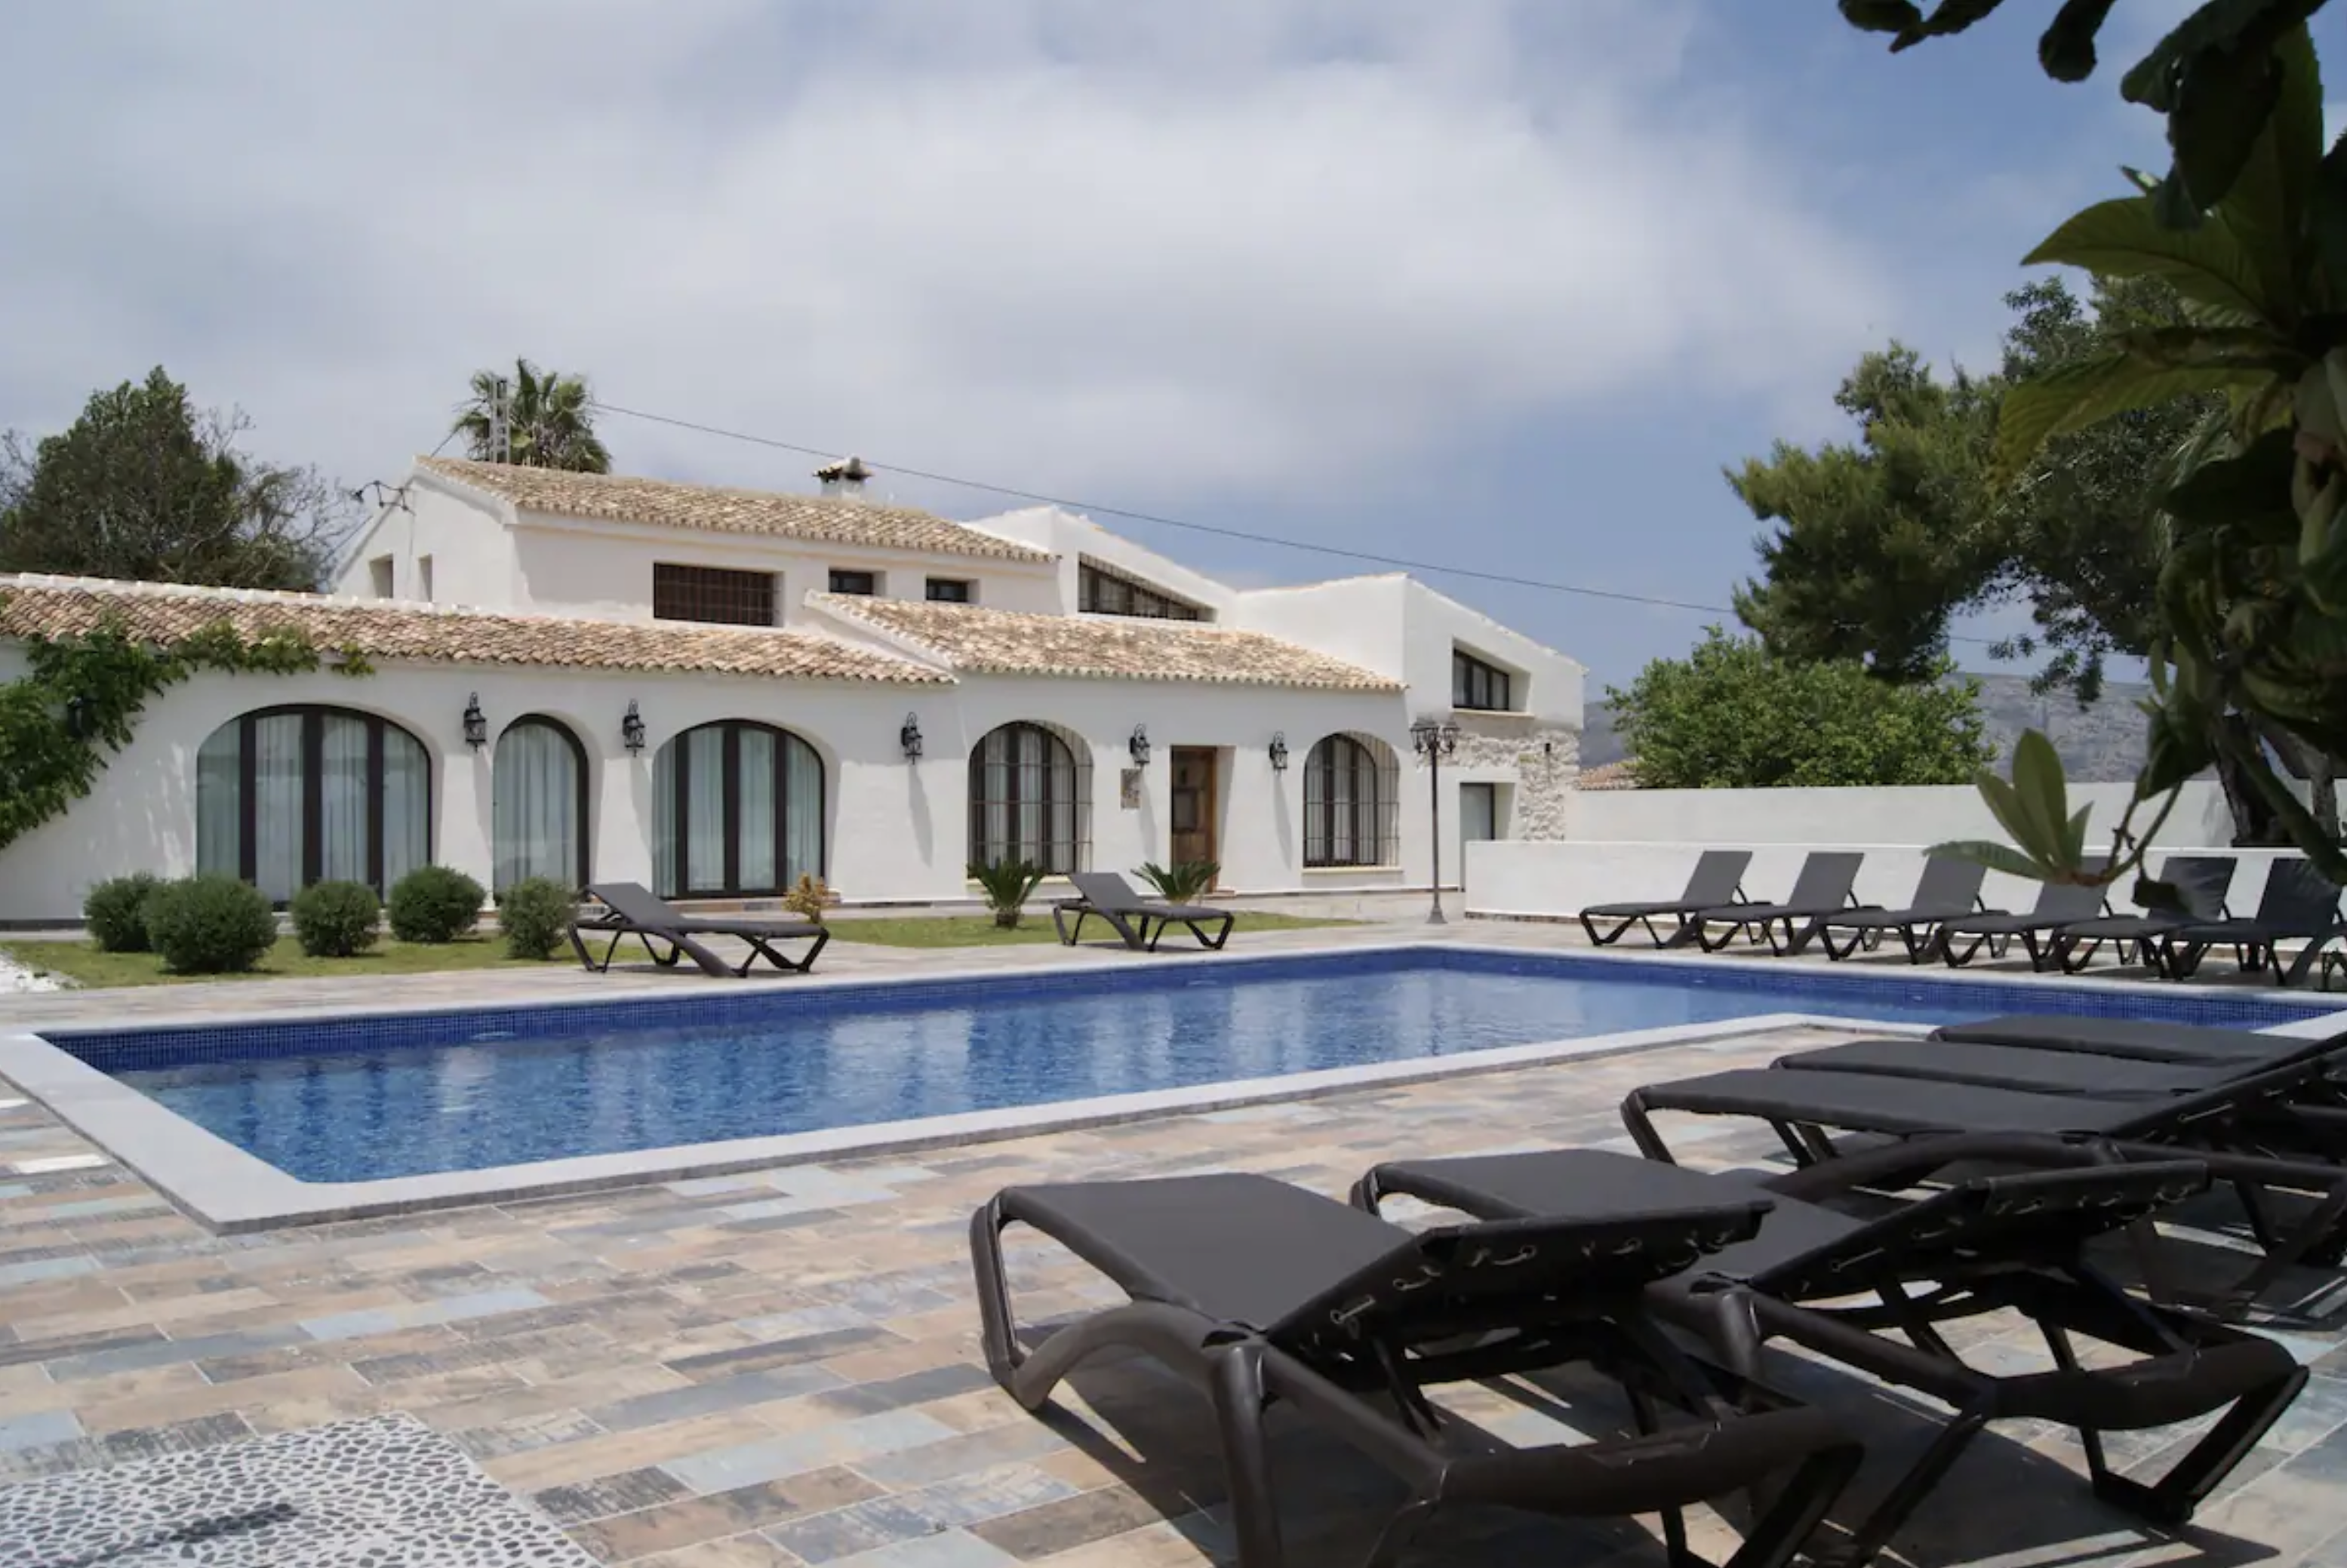 Poolside with a view of the villa in Moraira